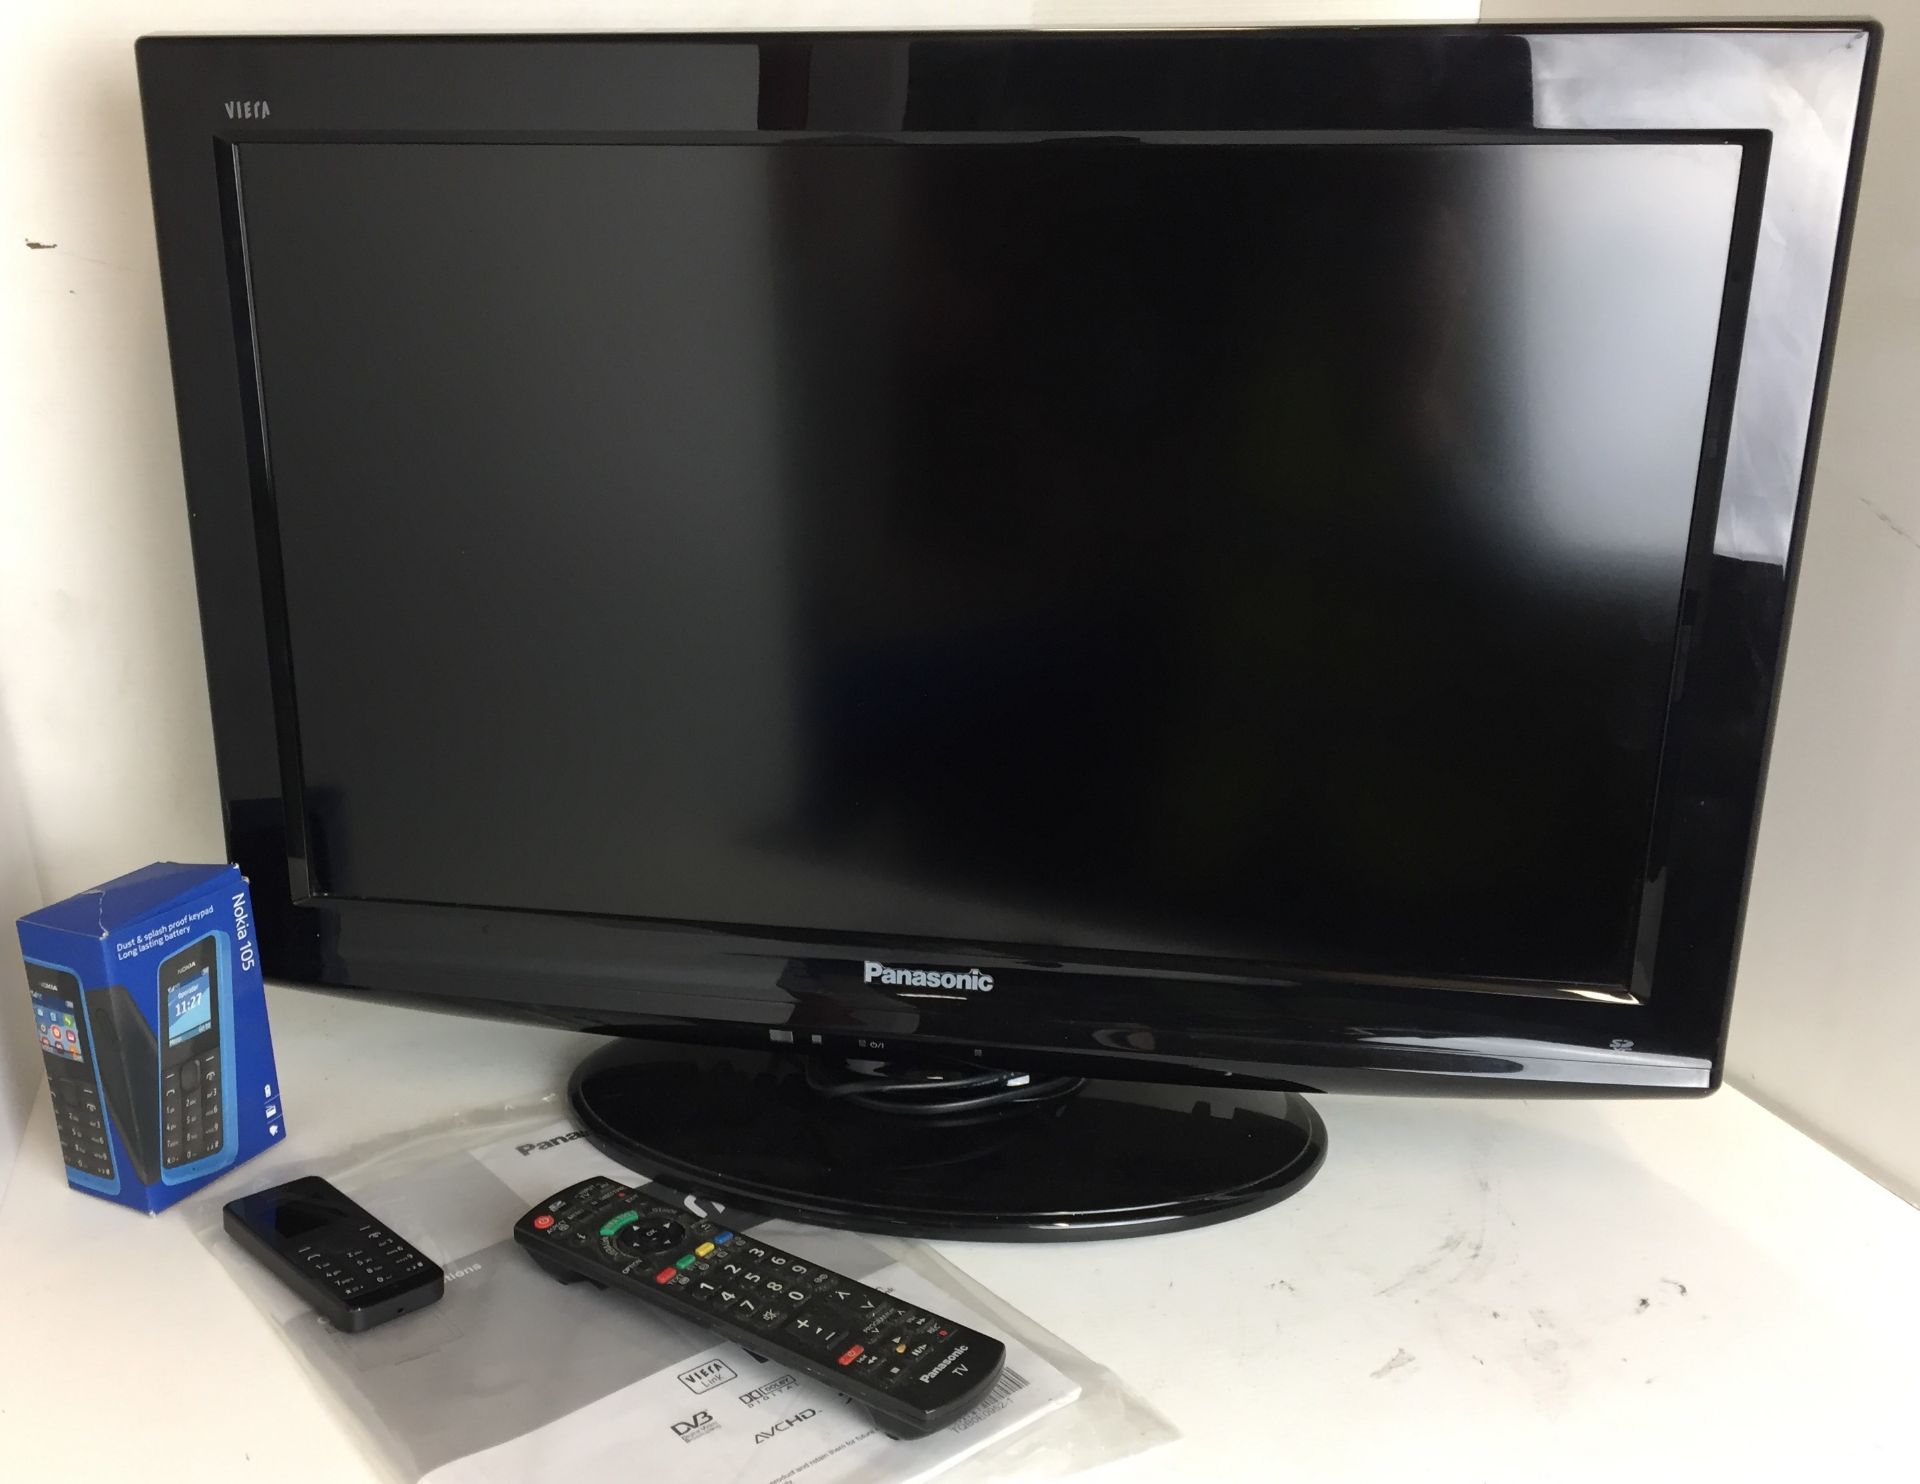 Two items Panasonic TX-L26C20B LCD television with remote control and instructions and Nokia 105